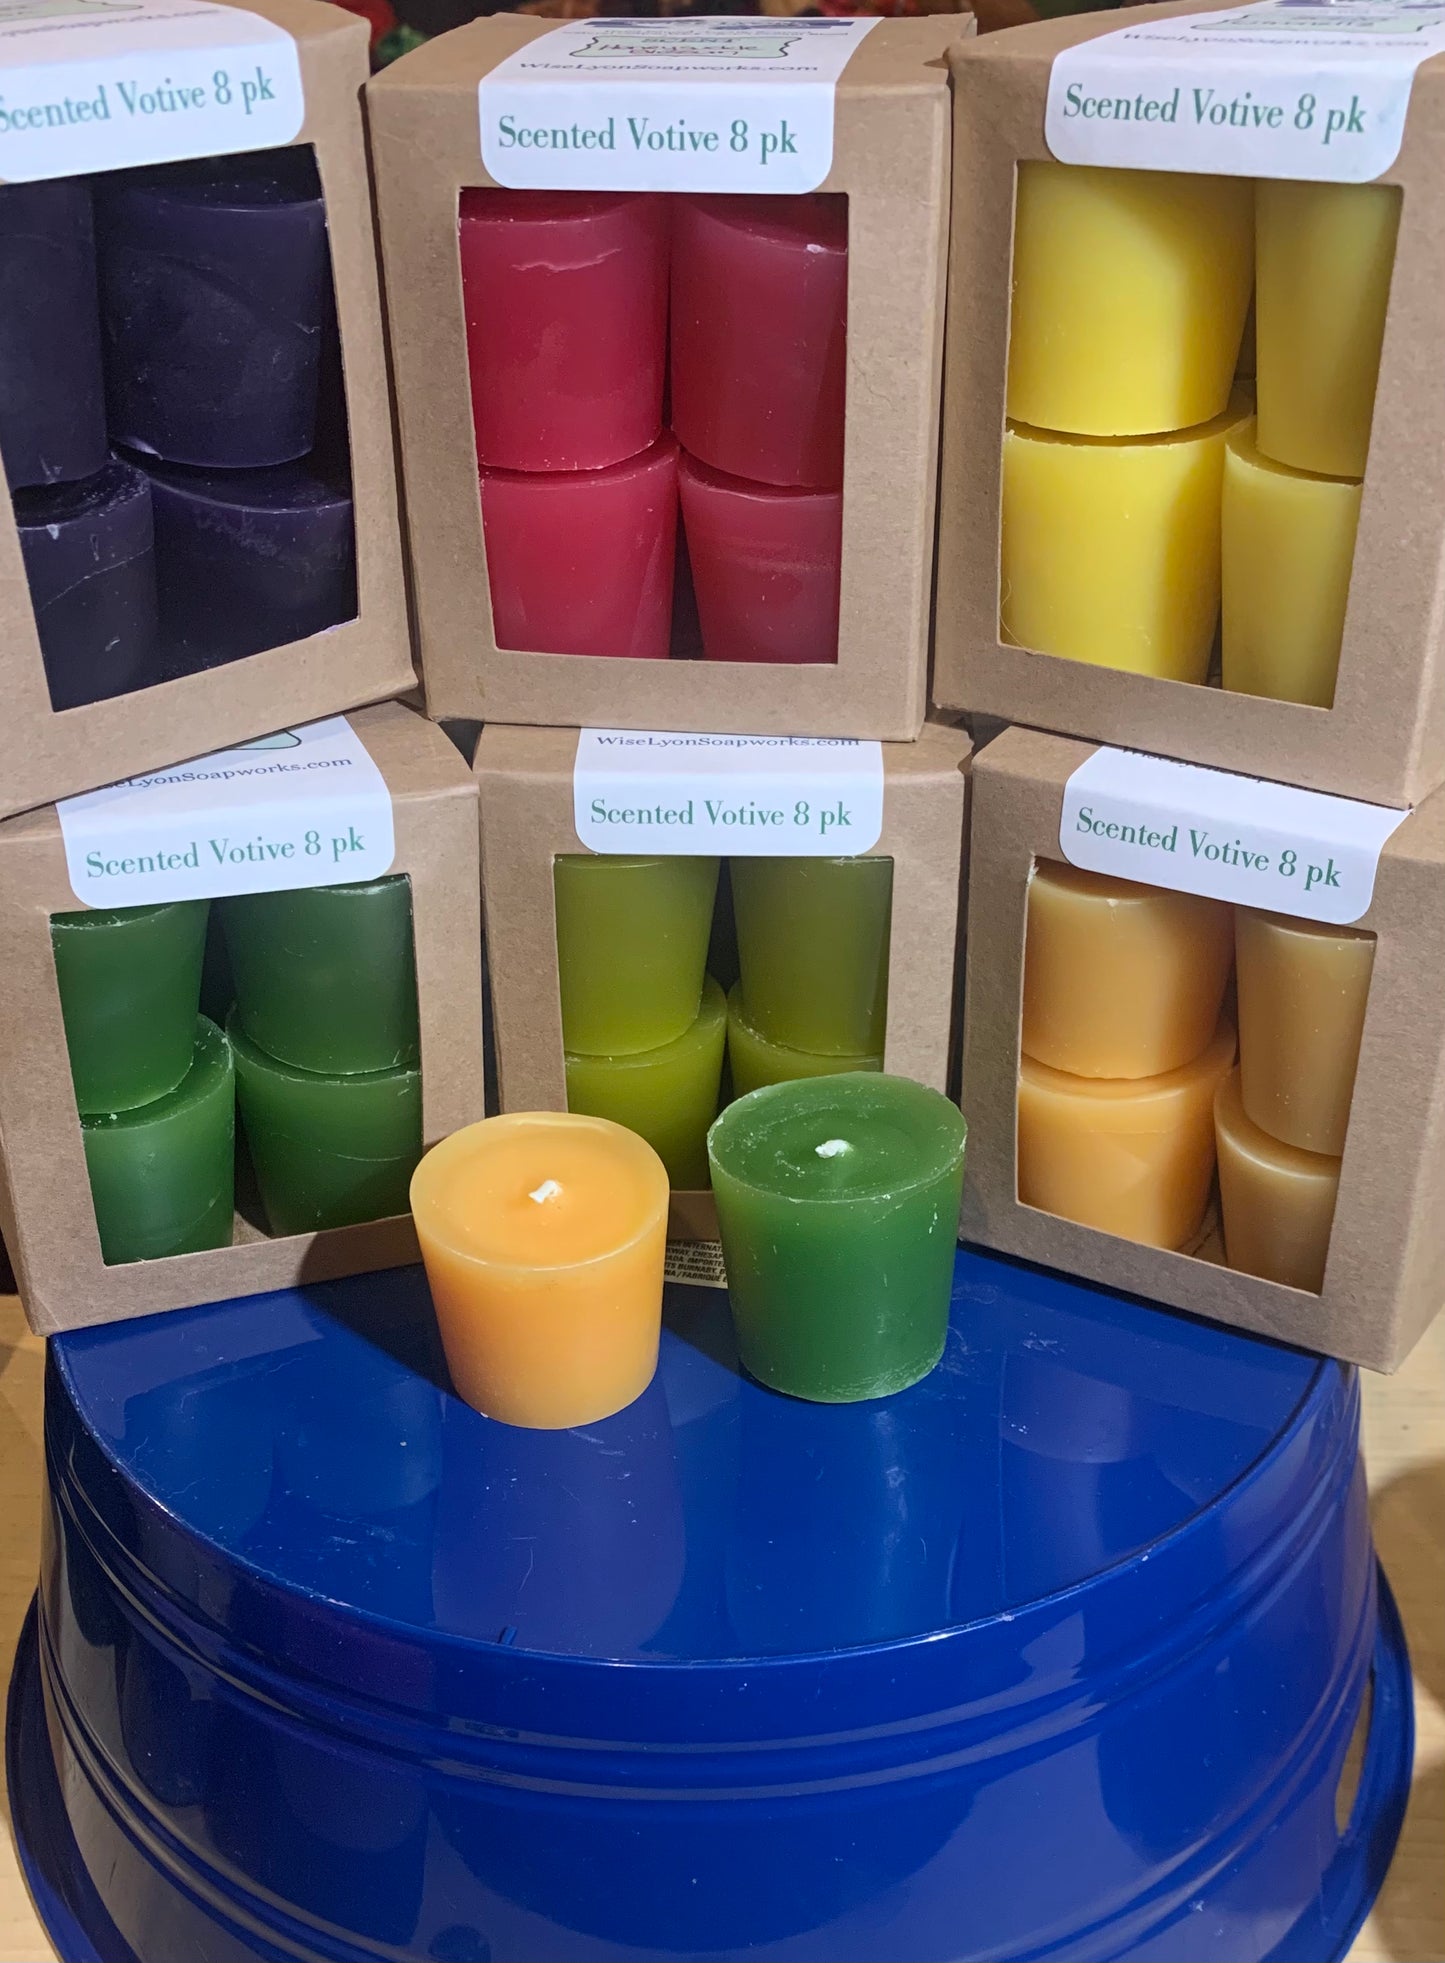 Scented Votive Candles 8 pack - Wiselyonsoapworks